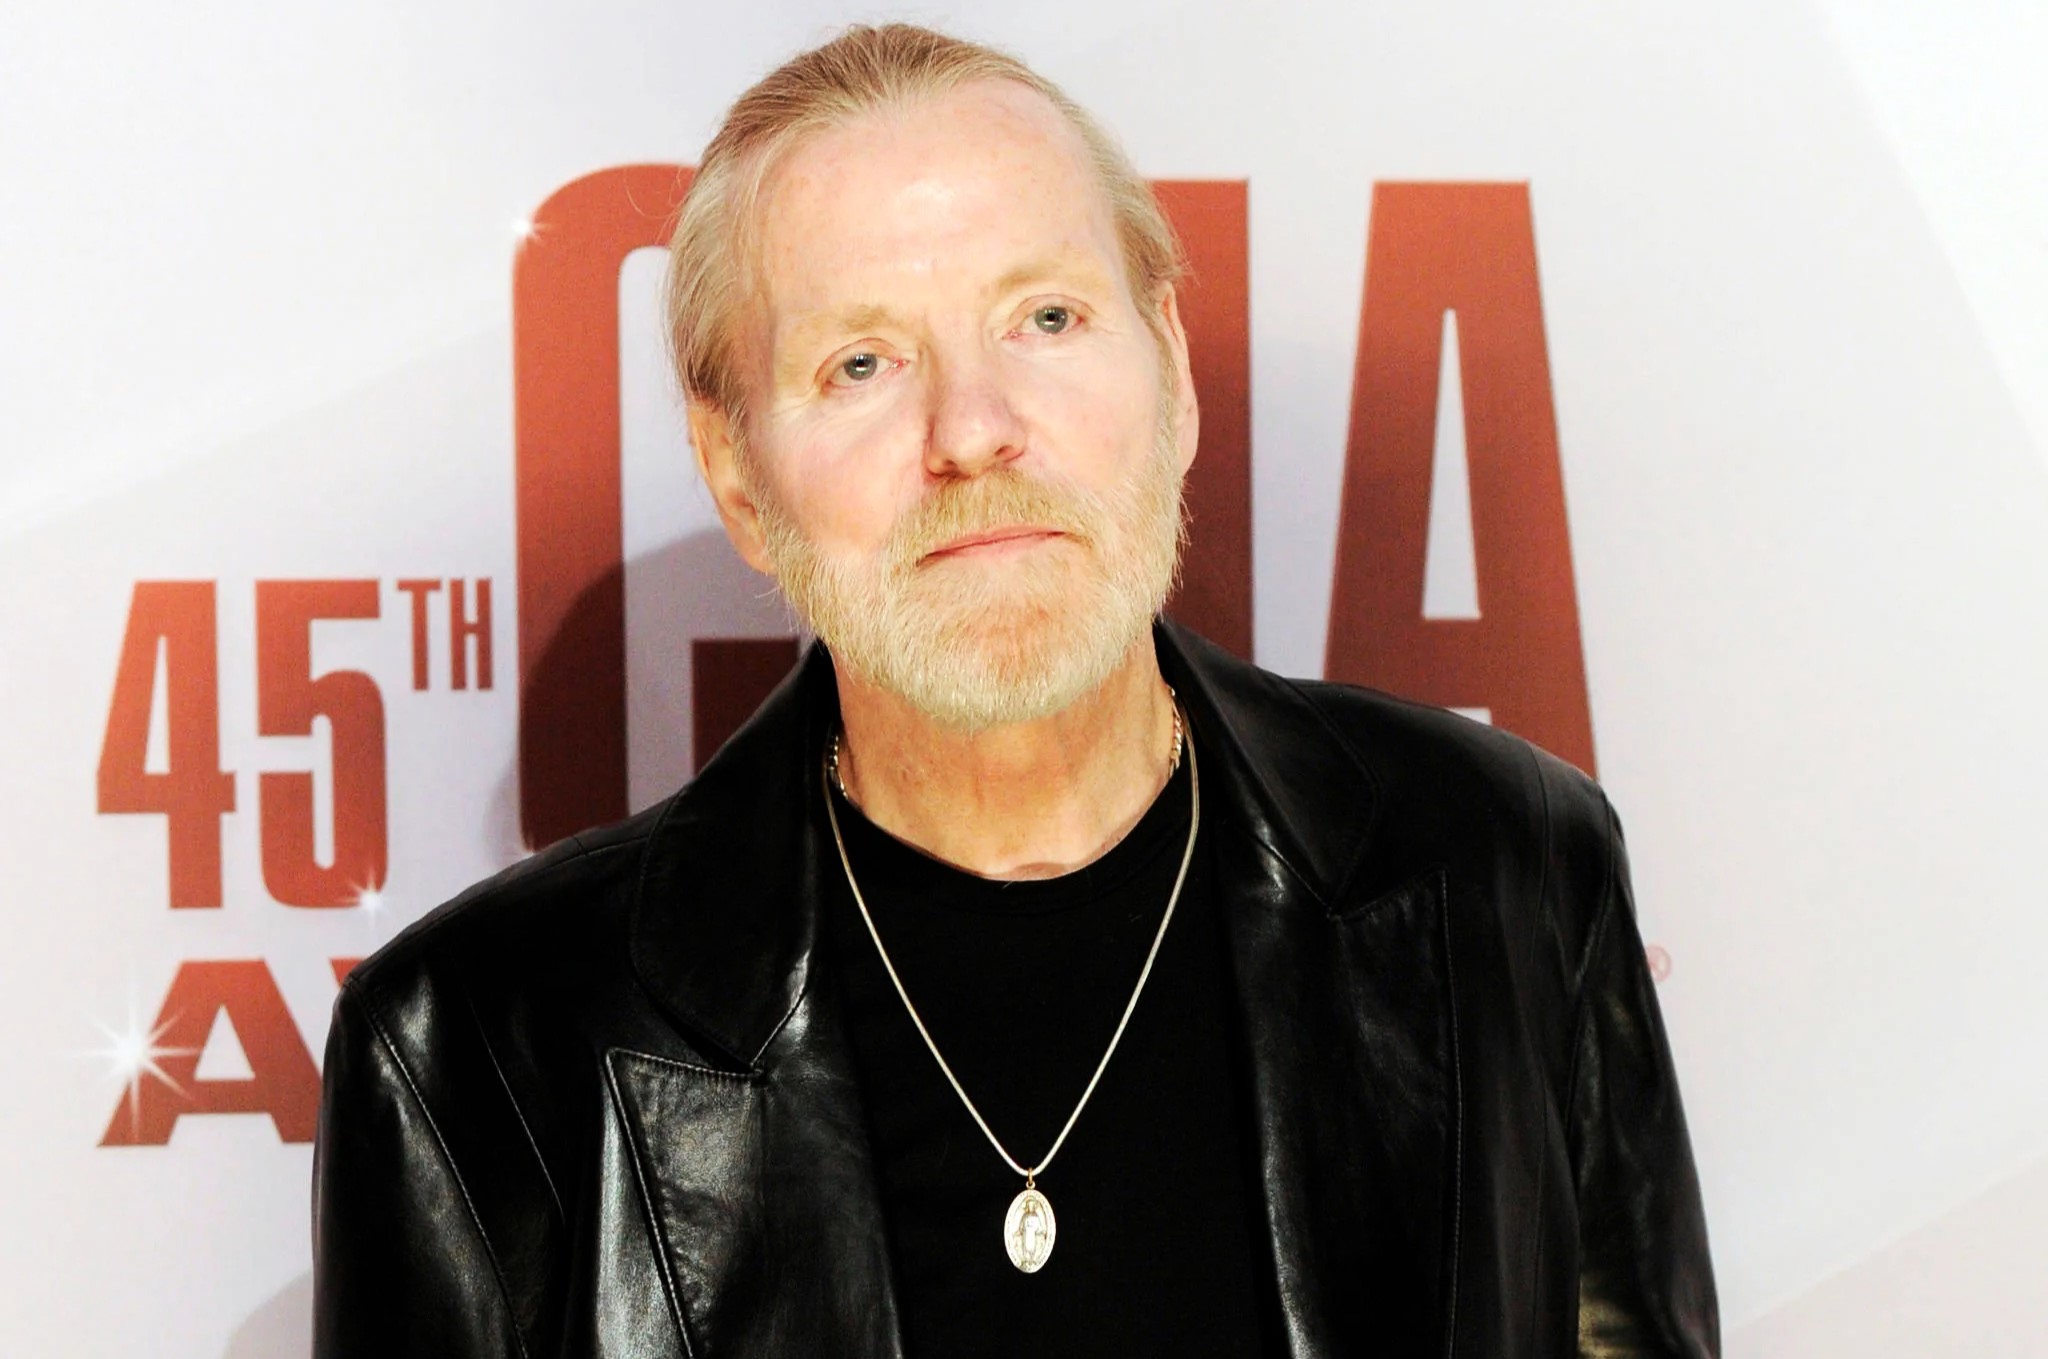 23 Enigmatic Facts About Gregg Allman - Facts.net